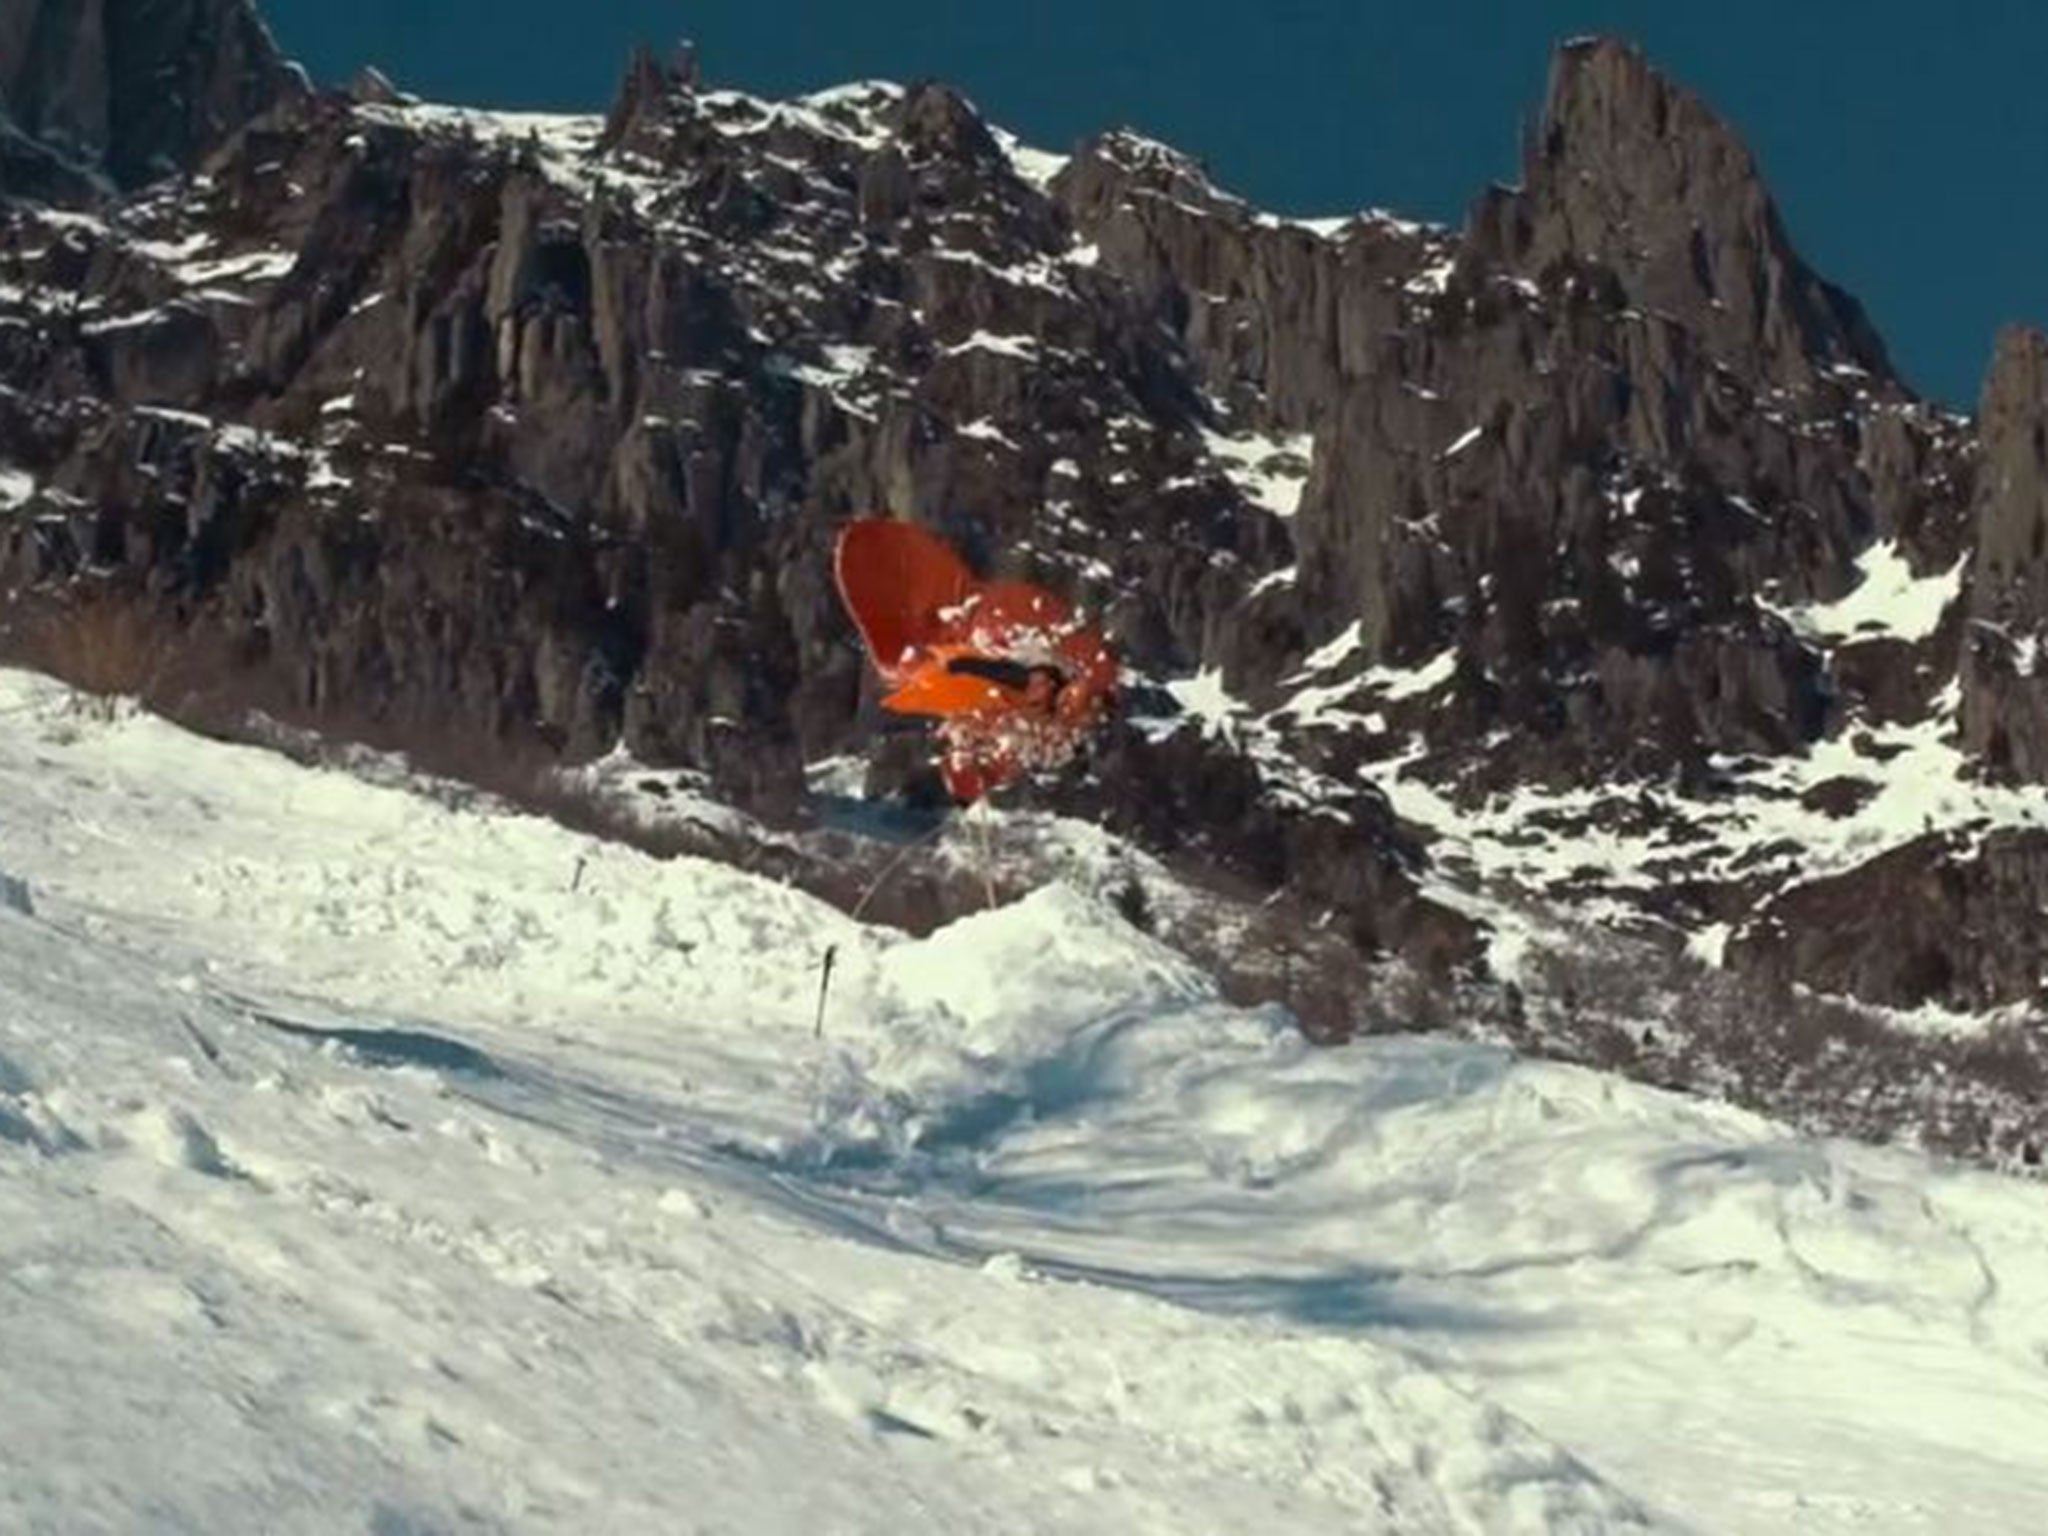 Sam Hardy smashes through a giant heart at 100 mph on the Chamonix mountain